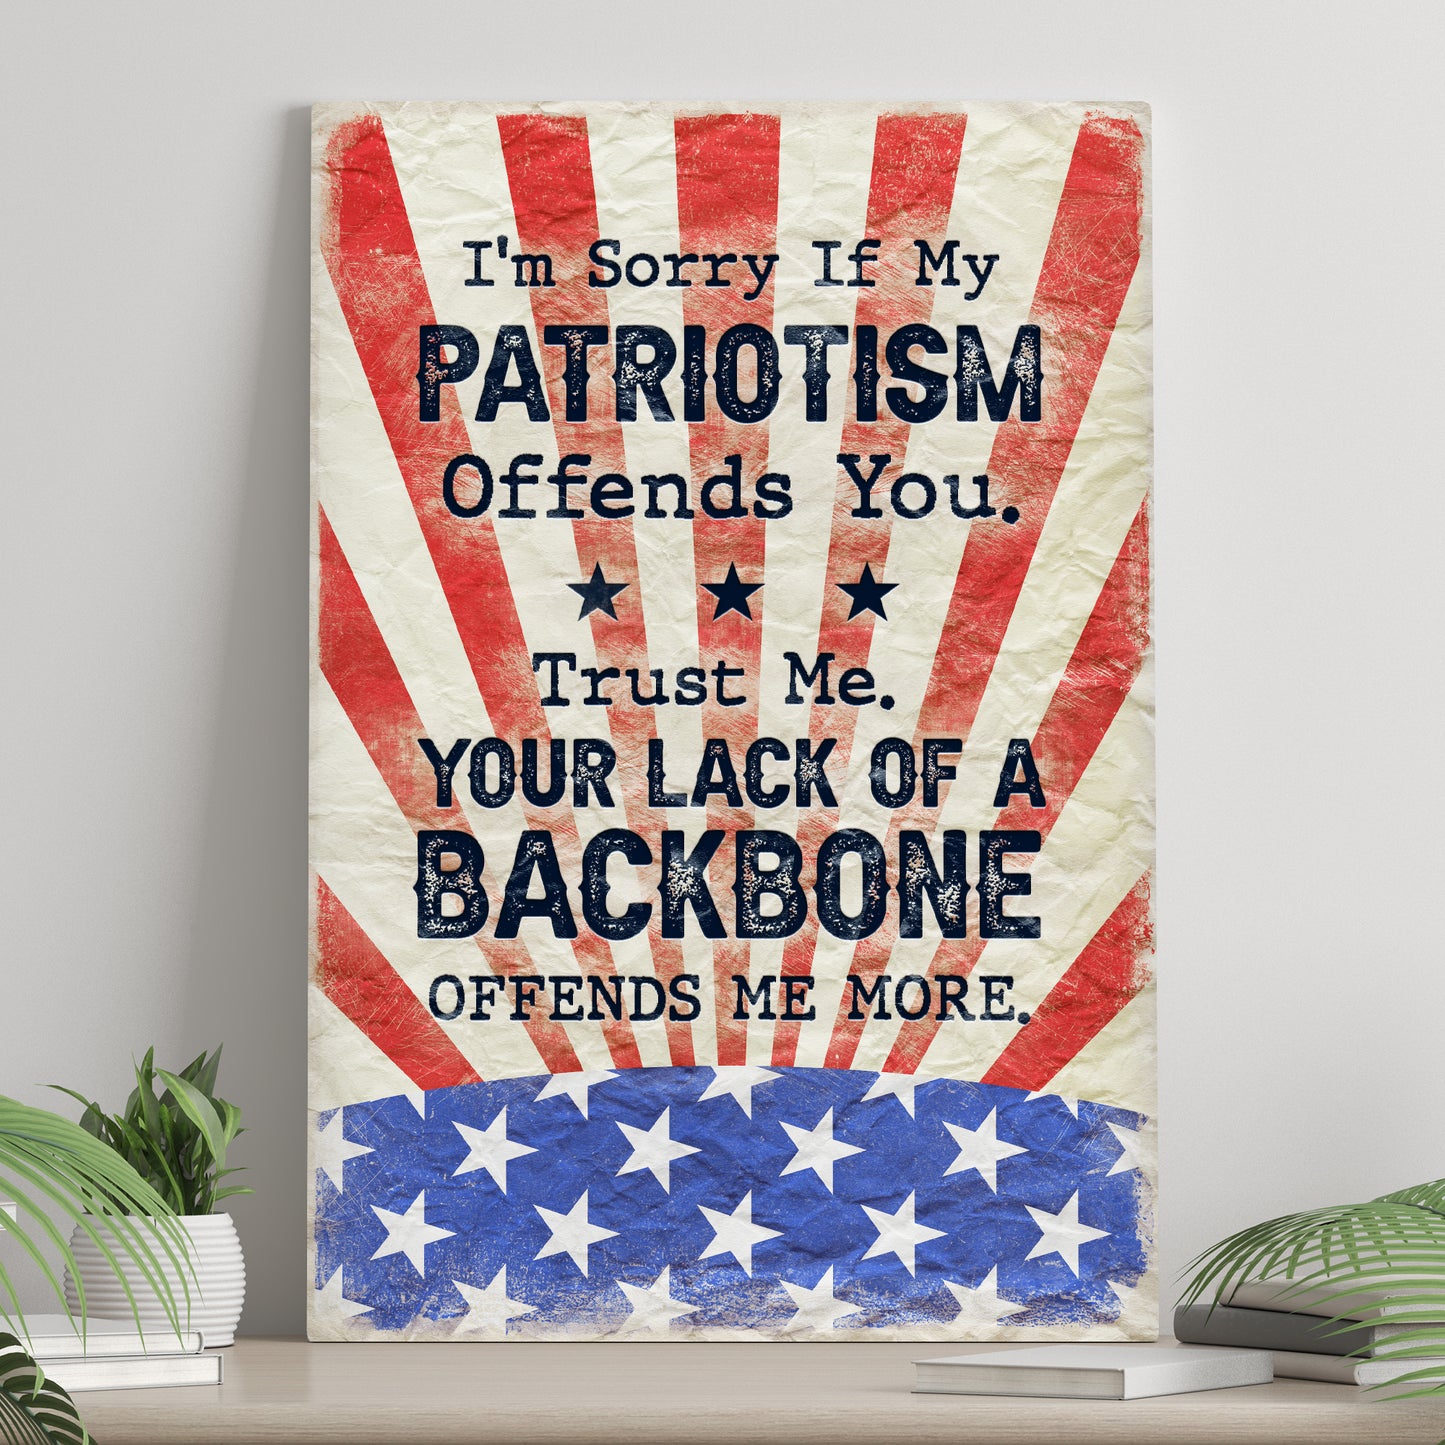 I'm Sorry If My Patriotism Offends You Sign II - Image by Tailored Canvases